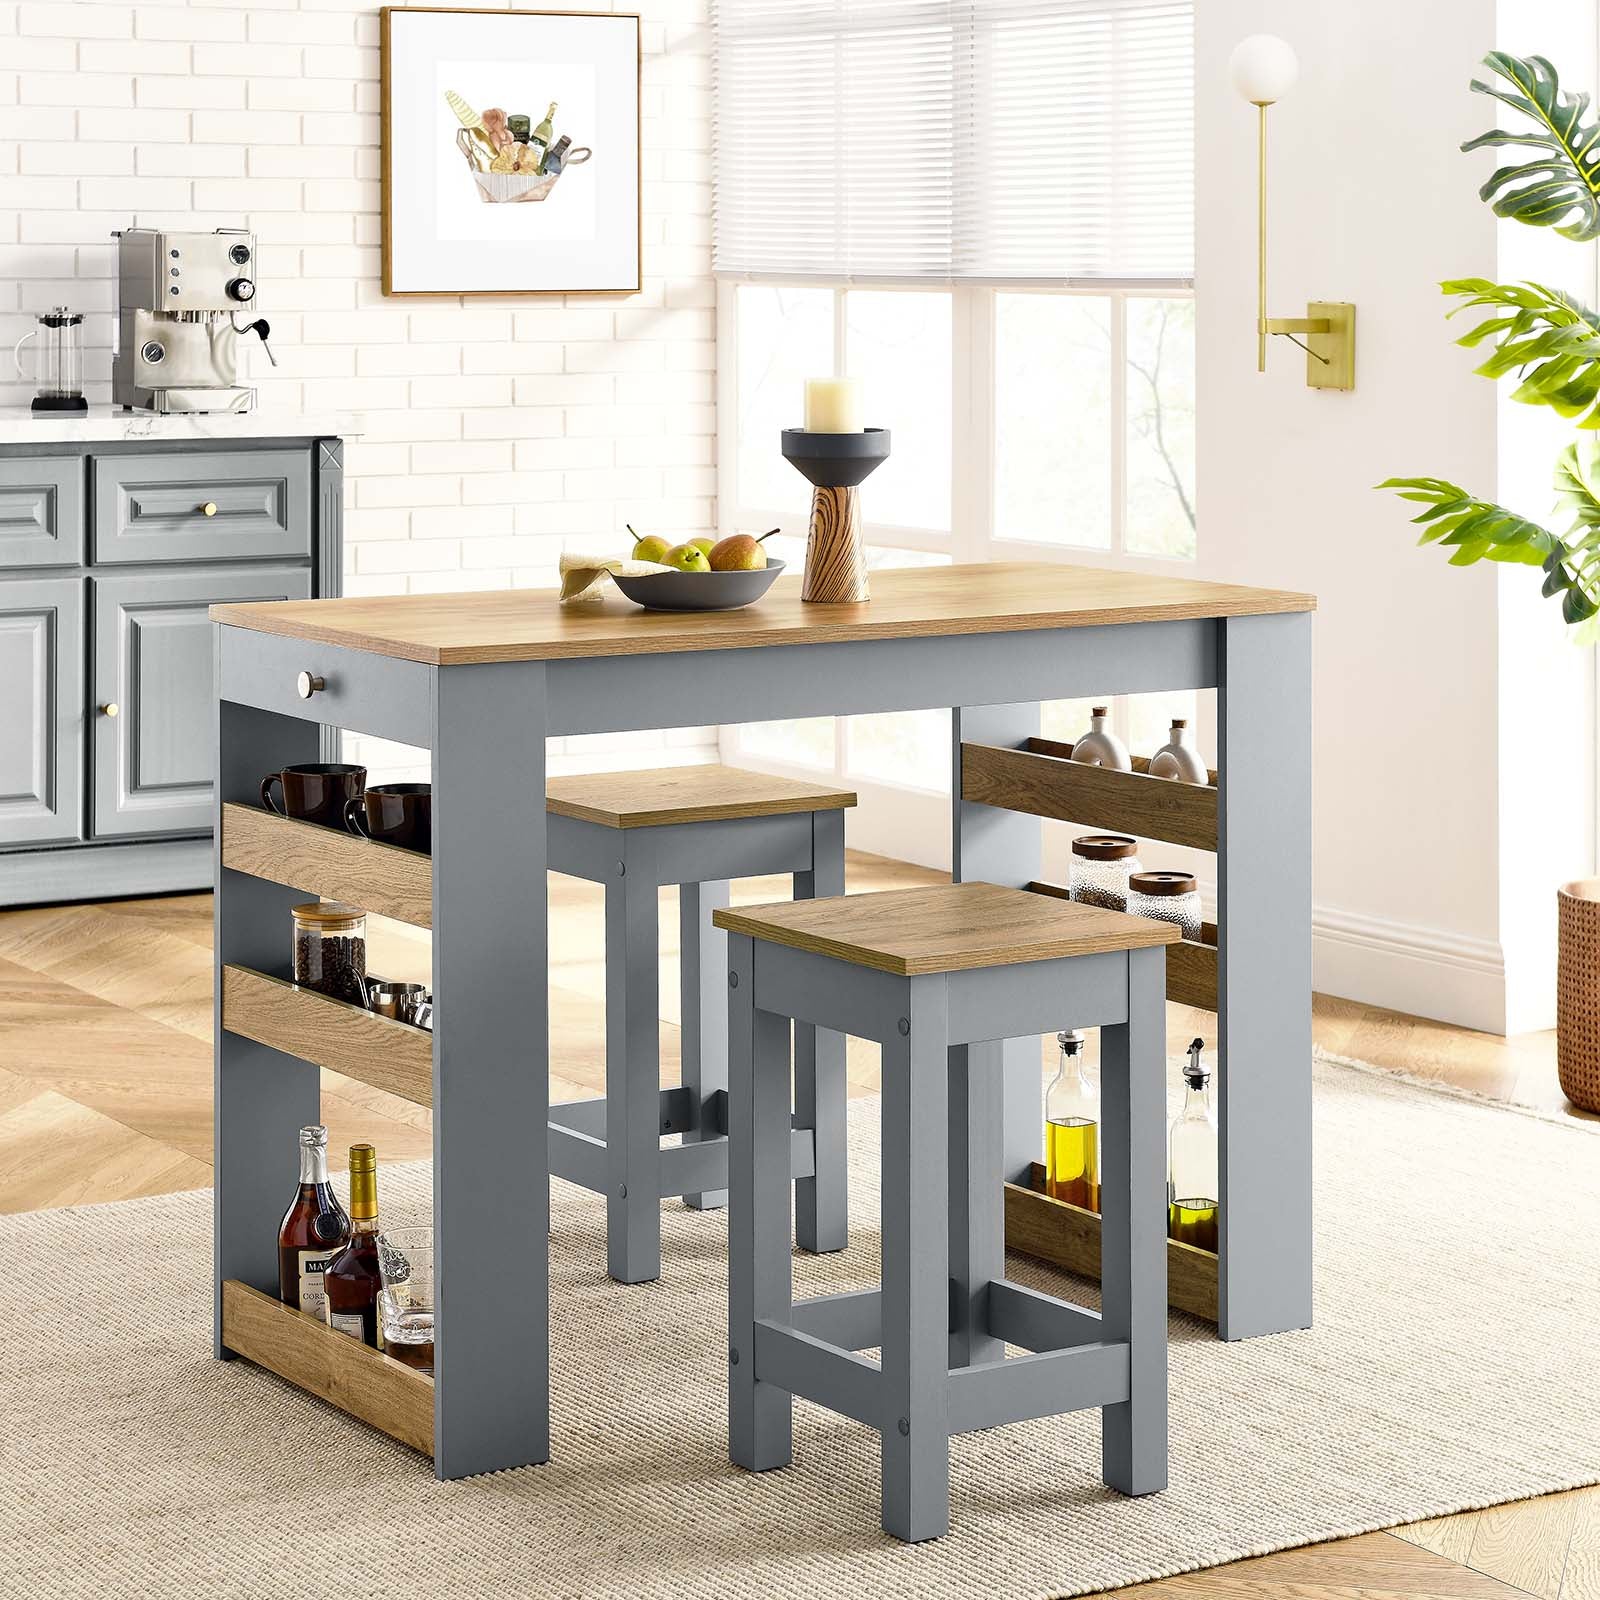 Galley 3-Piece Kitchen Island and Stool Set